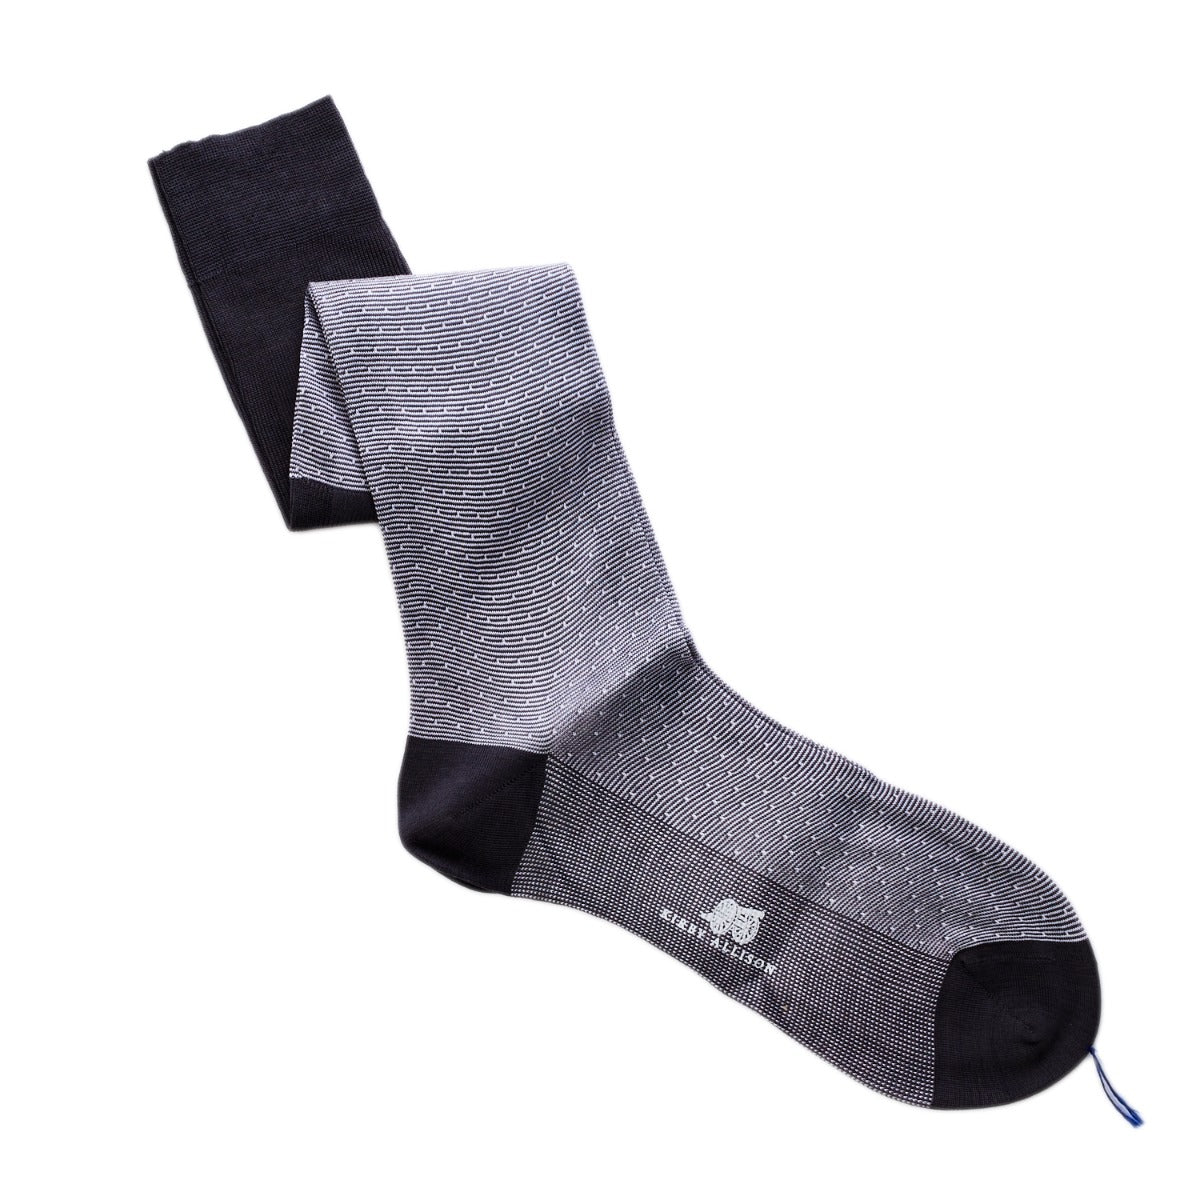 A pair of Sovereign Grade Horizontal Jacquard Cotton Dress Socks by KirbyAllison.com on a white background.